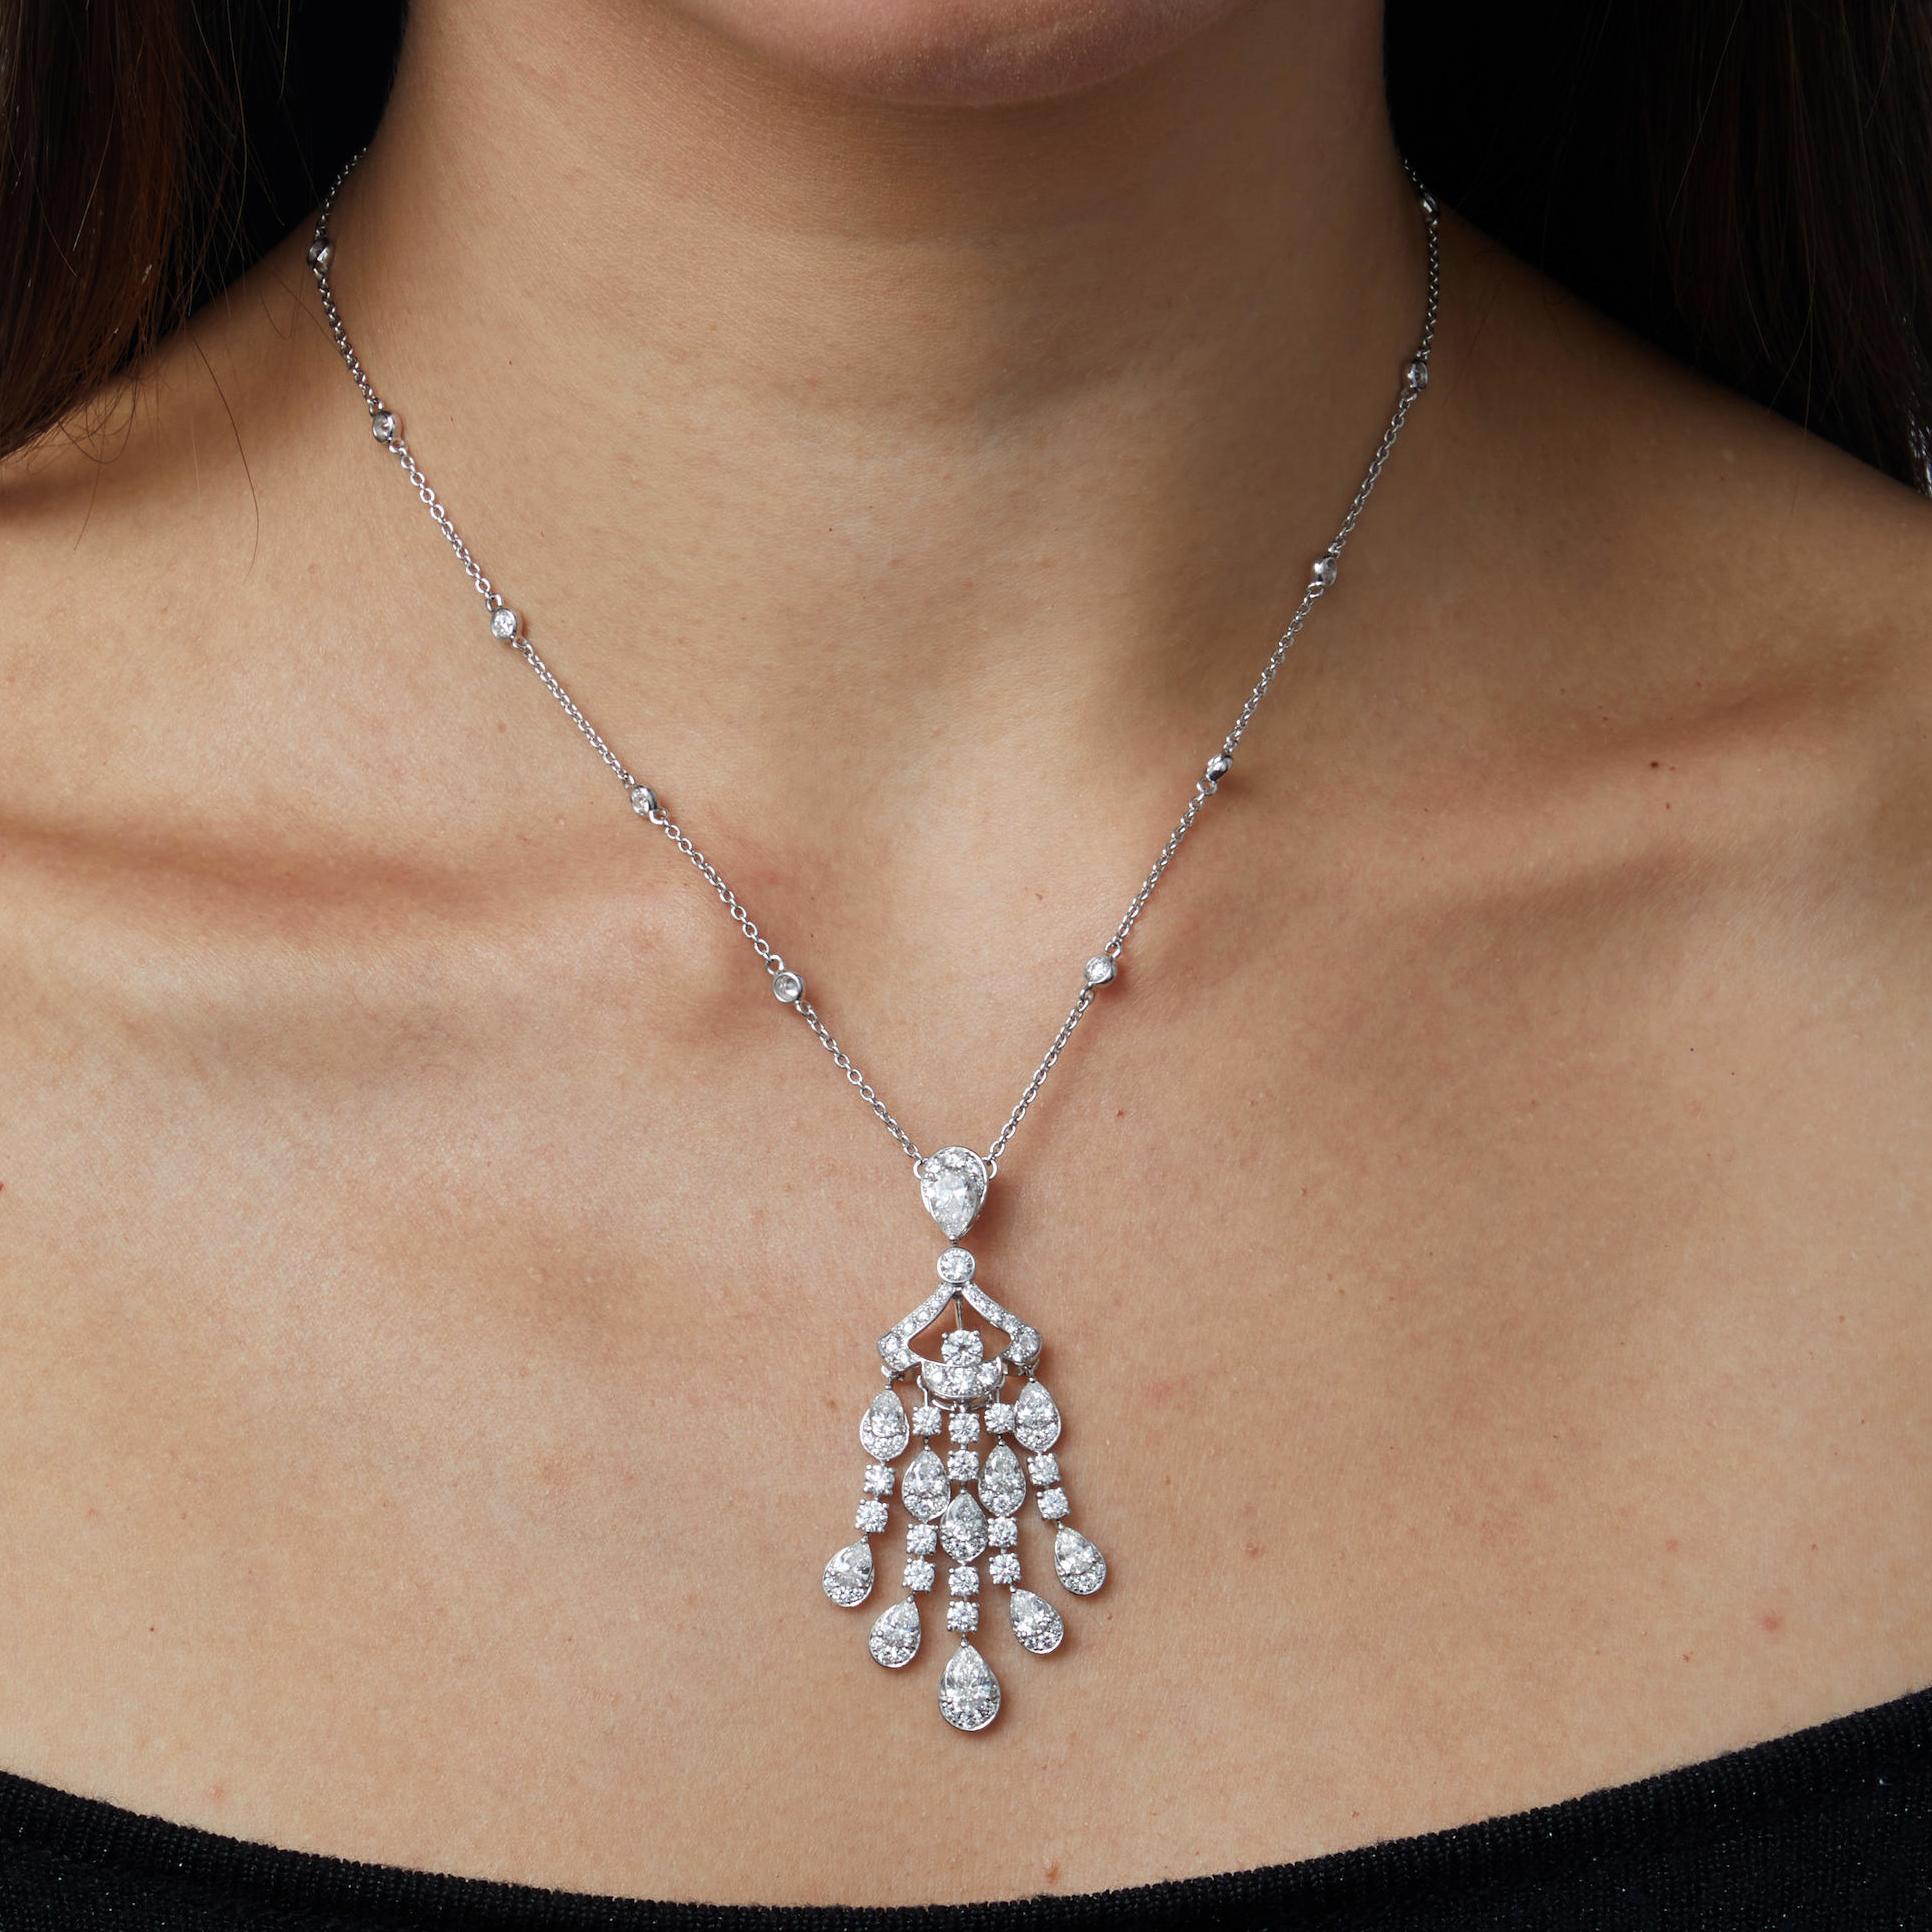 An incredible diamond necklace by Graff showcasing a .70ct pear shaped diamond followed by cascading fringes adorned with the finest round and pear shaped diamonds set in 18k white gold. 

The necklace measures 16 1/2